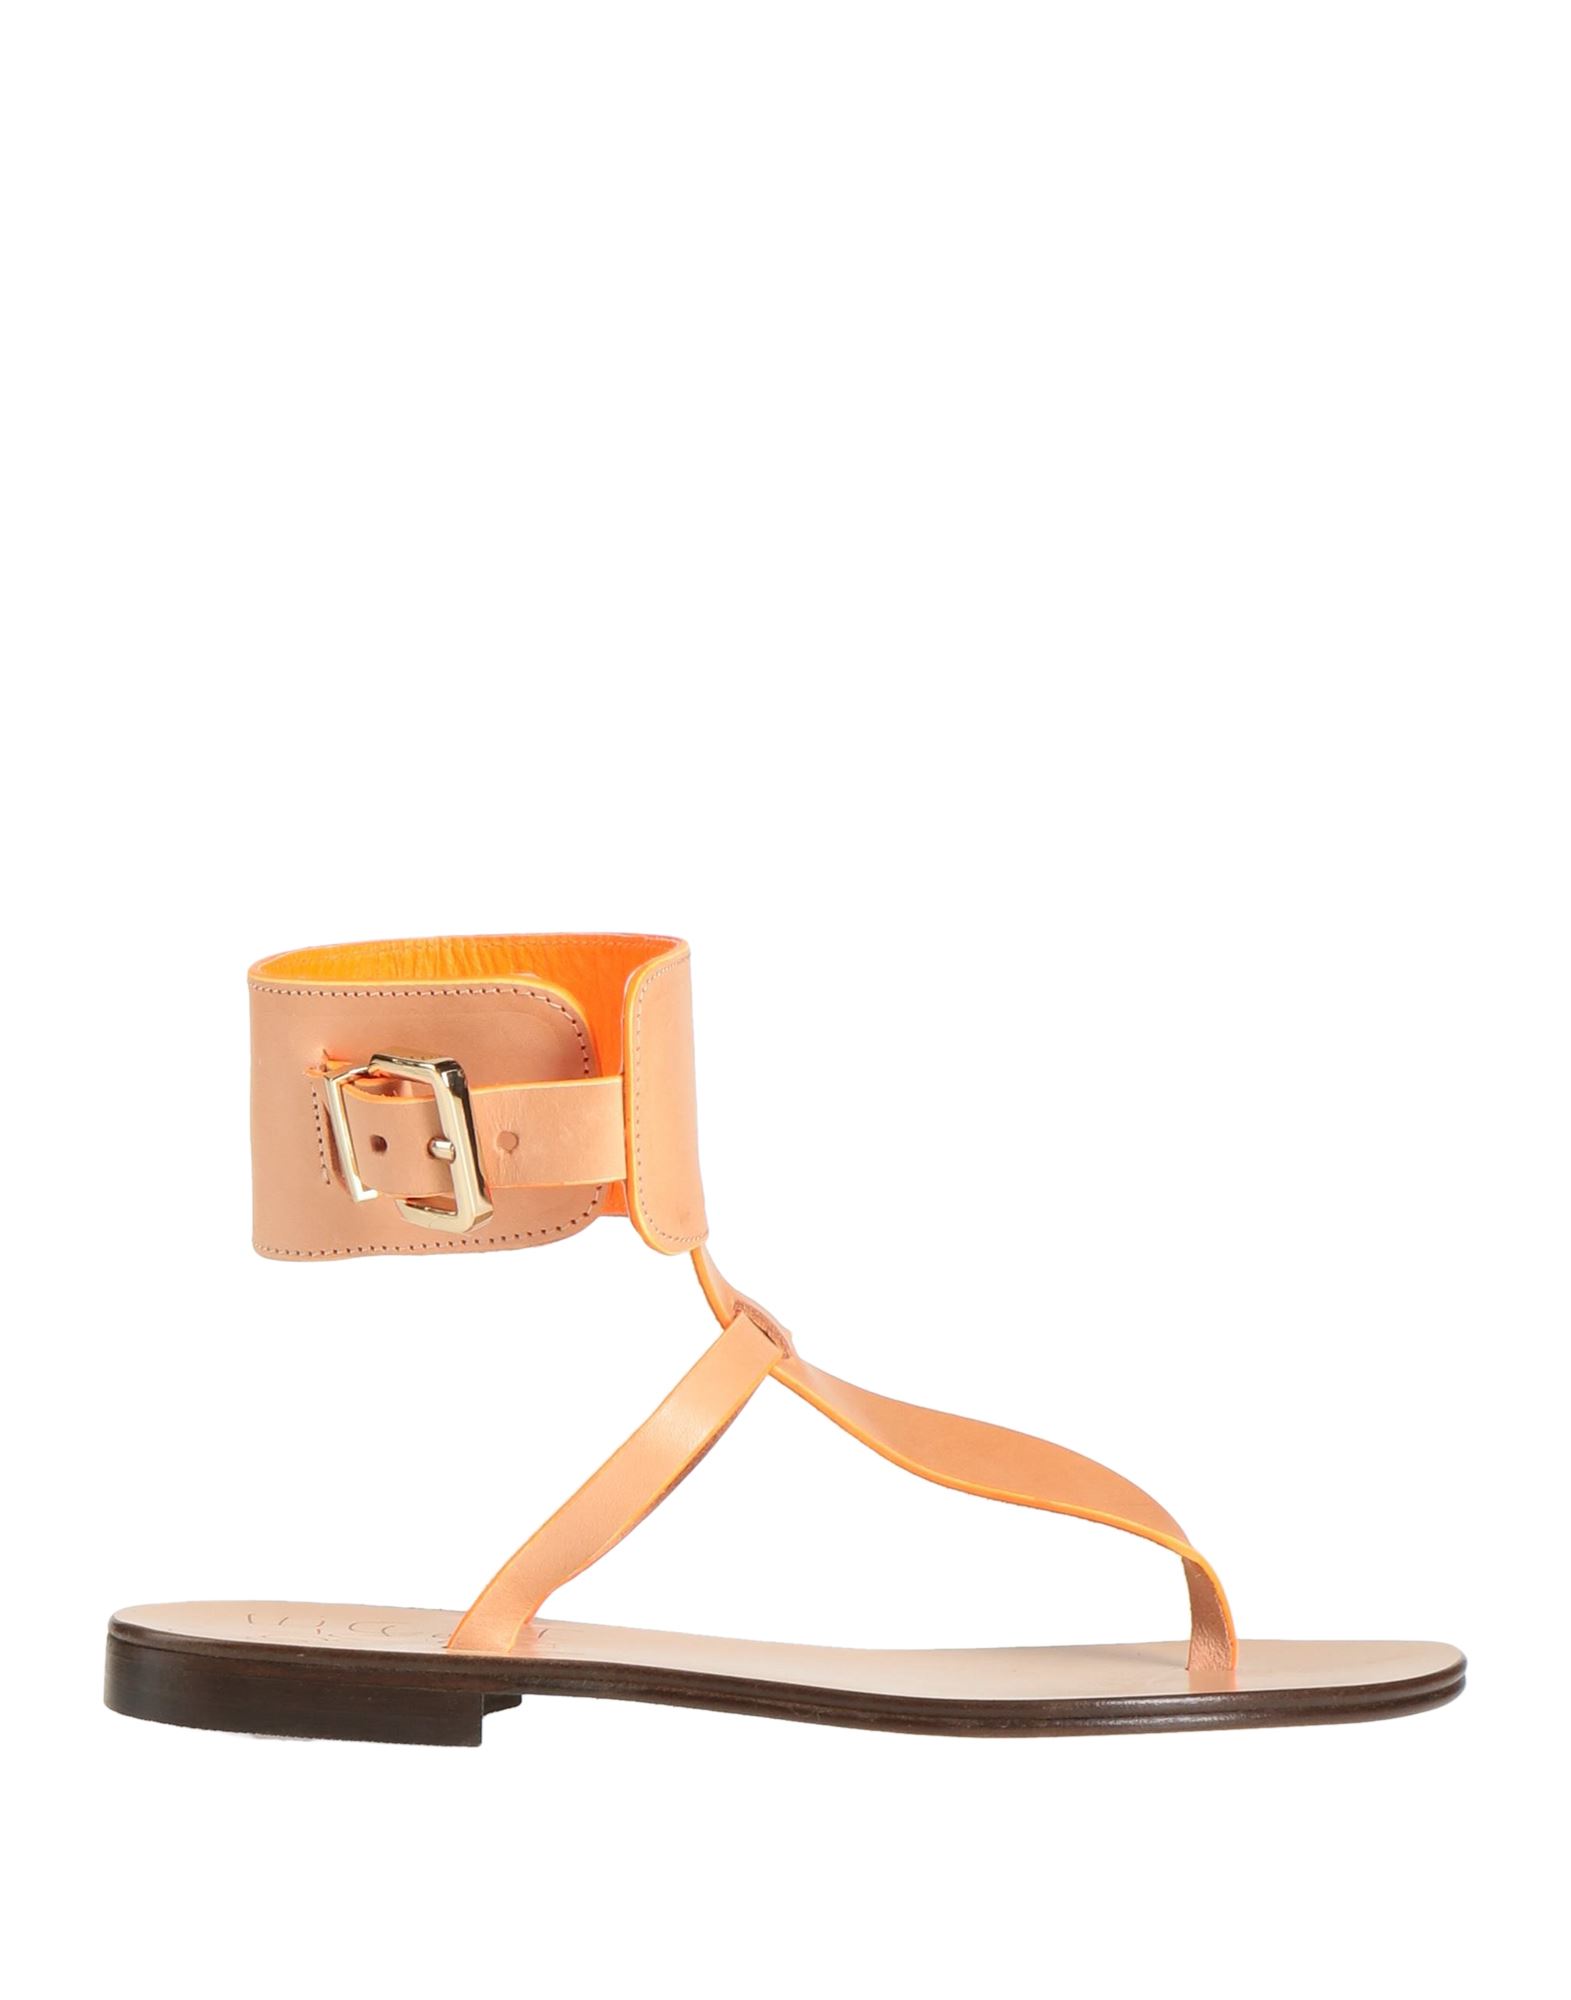 Solemaria Toe Strap Sandals In Gold